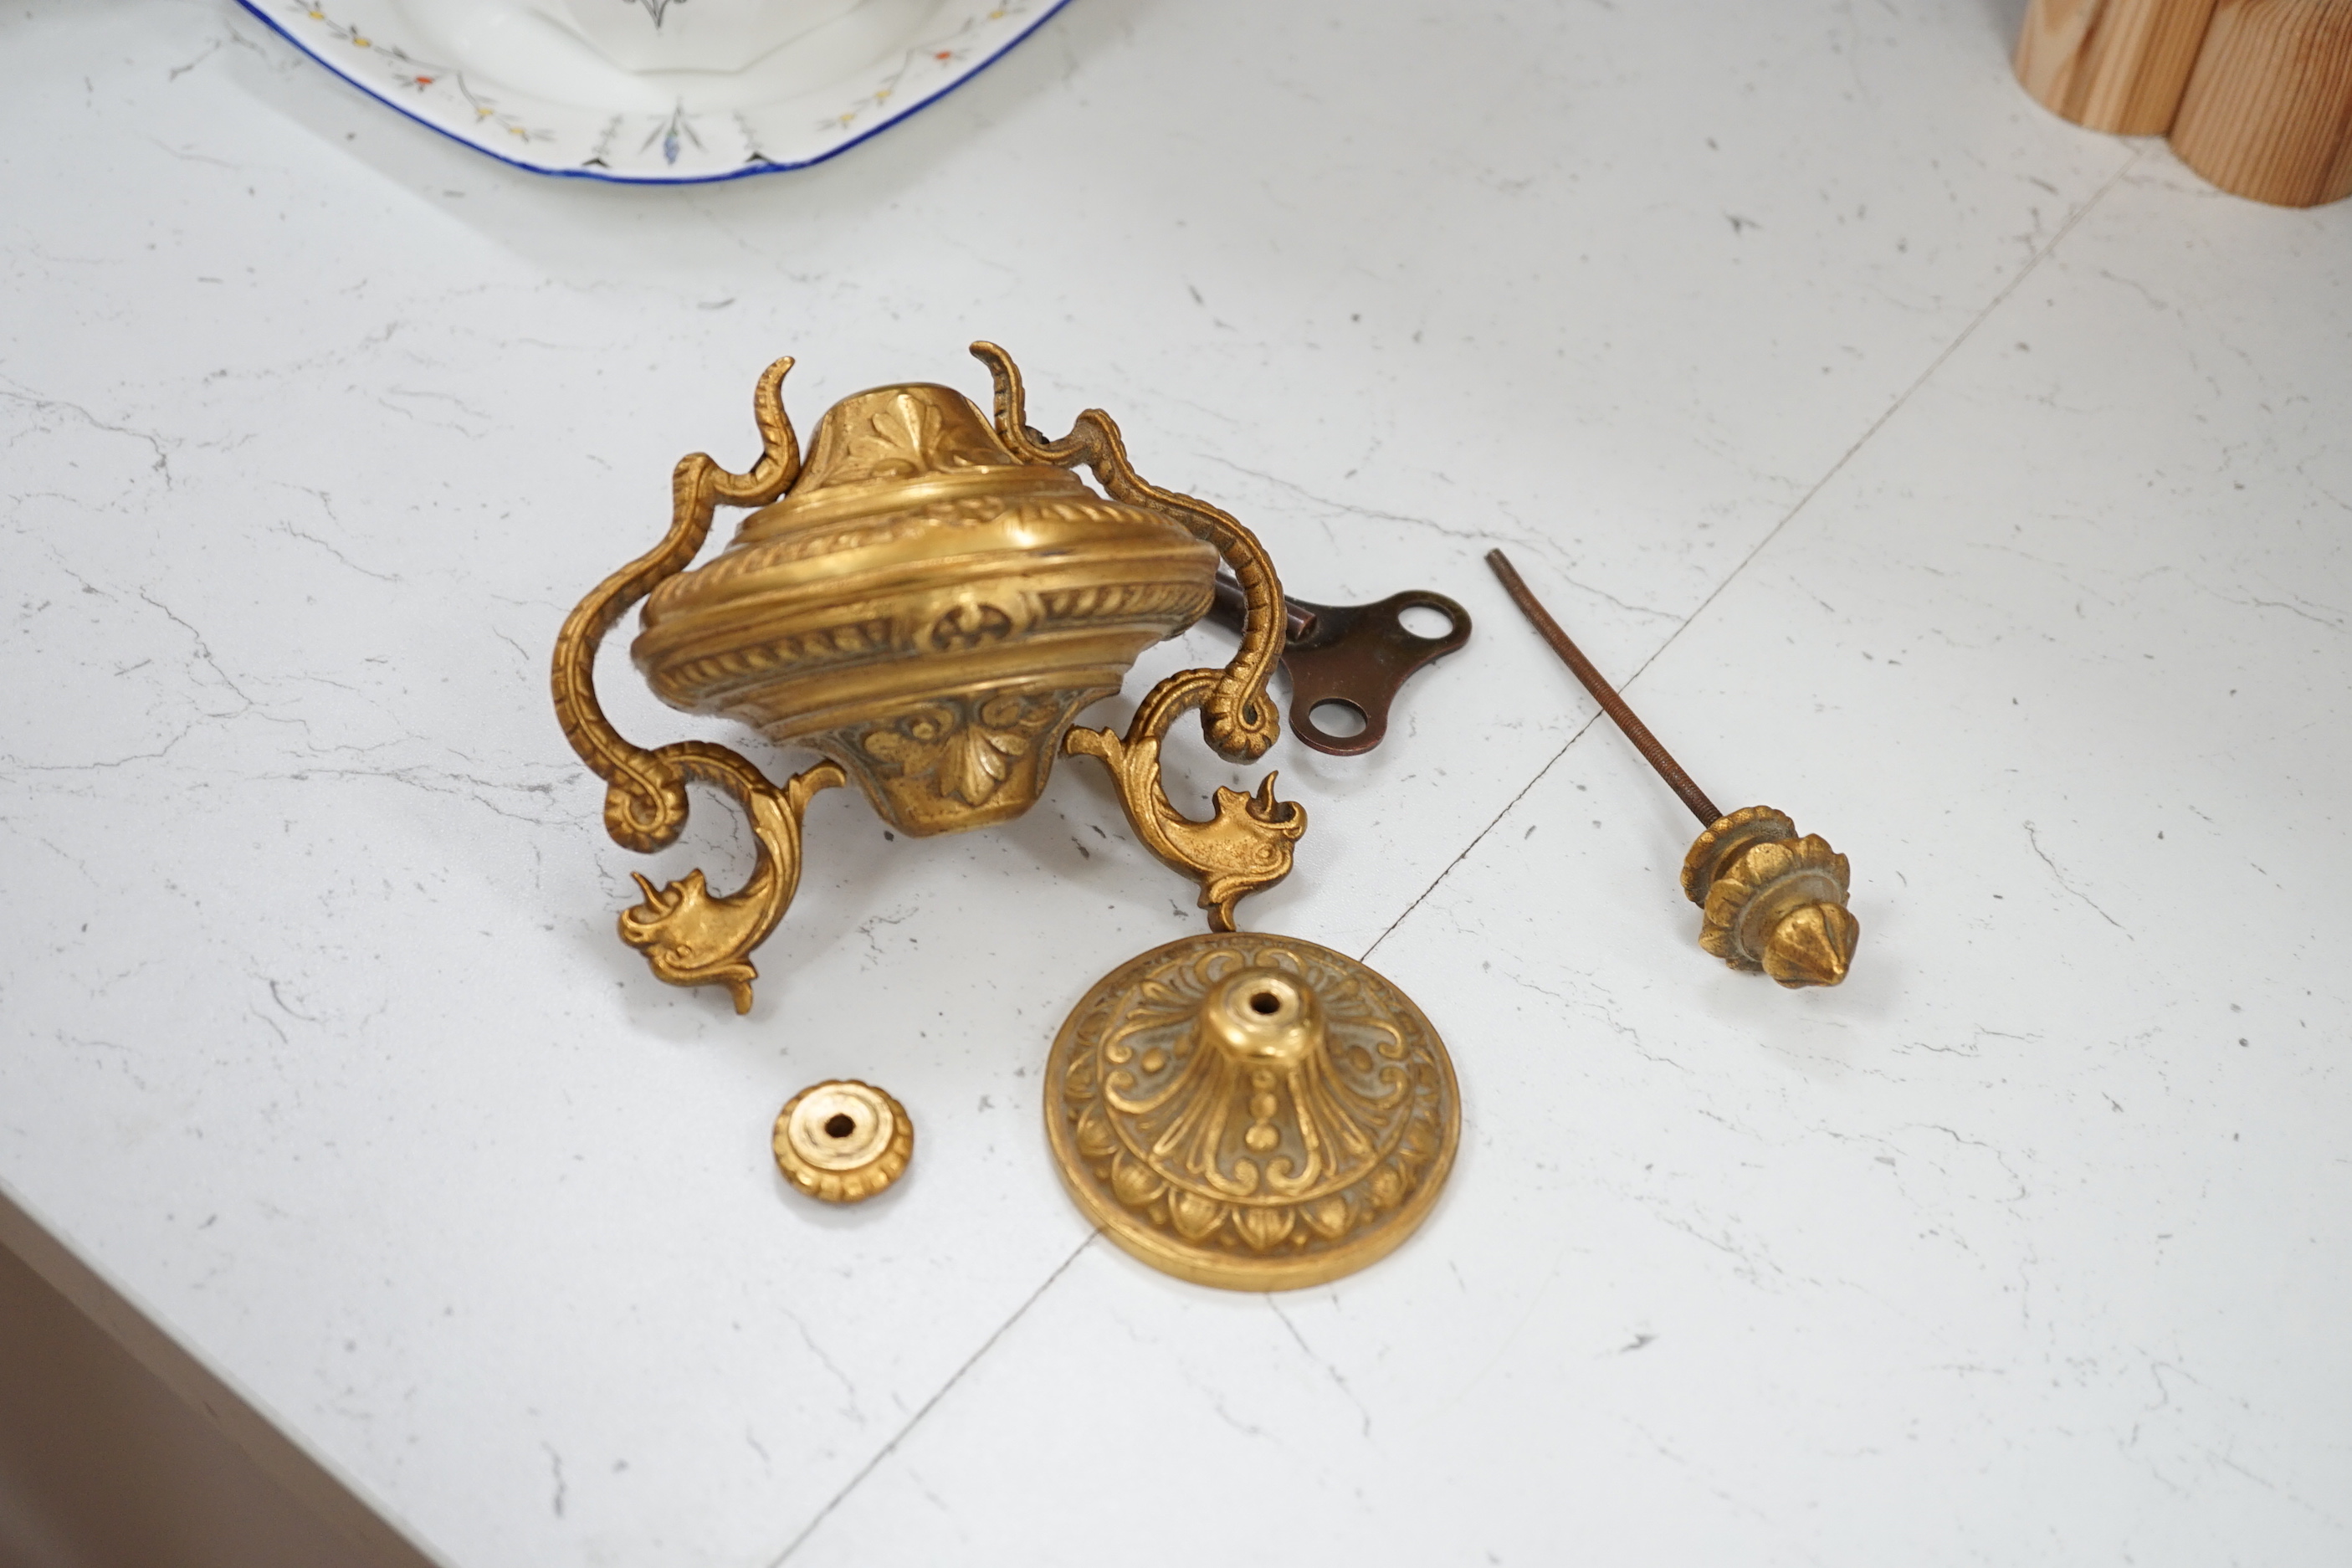 A French brass mantel clock, c.1900- no pendulum, loose finial, 37cm excl finial